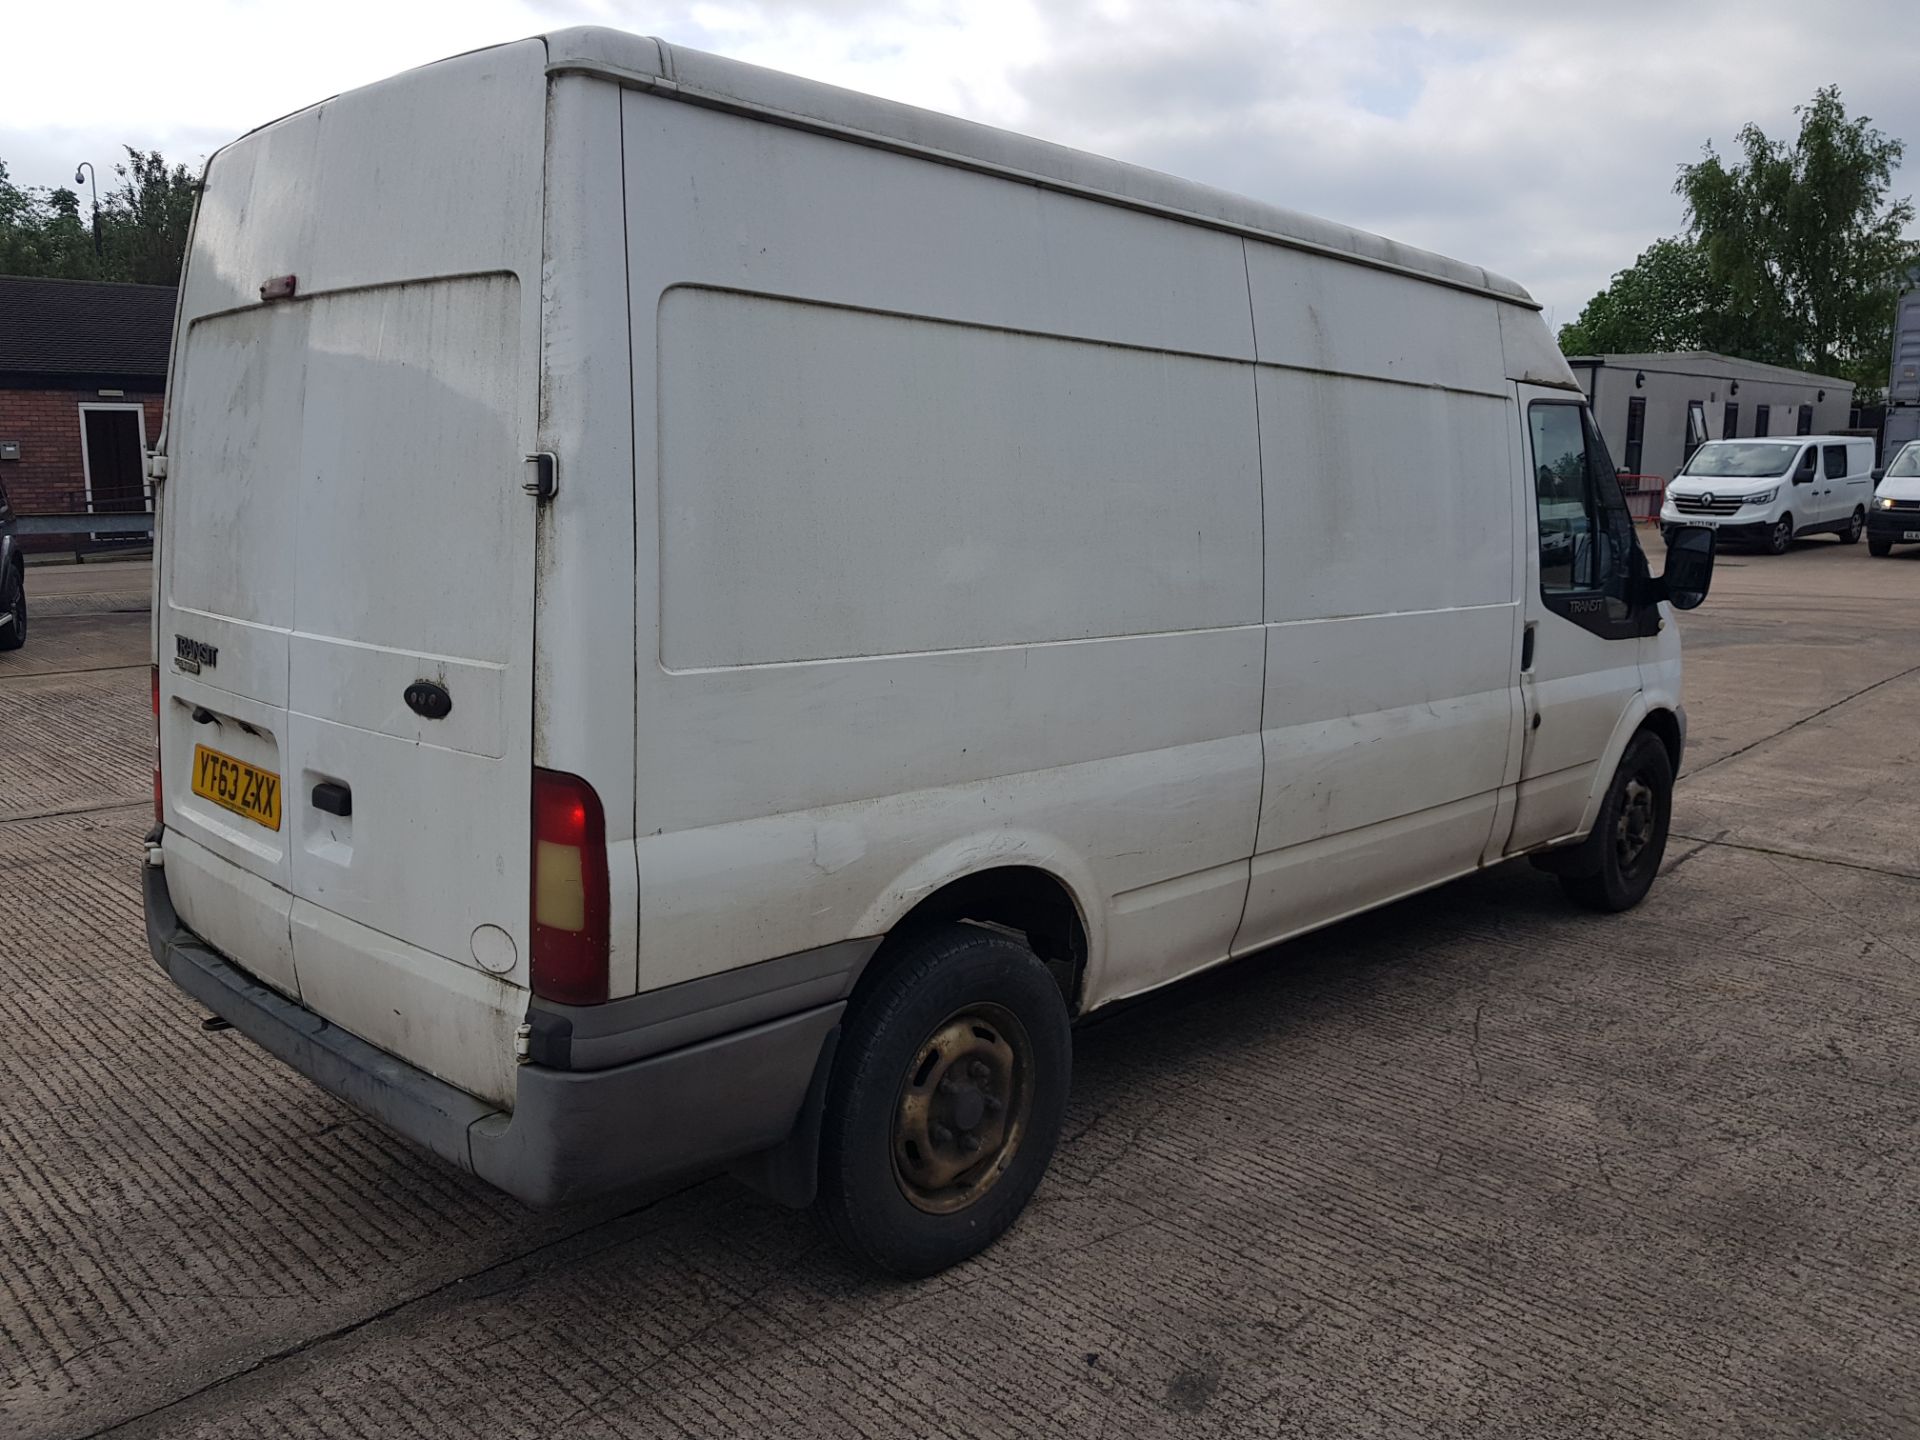 WHITE FORD TRANSIT 125 T350 RWD DIESEL PANEL VAN 2198CC FIRST REGISTERED 11/2/2014 REG: YT63ZXX - Image 3 of 11